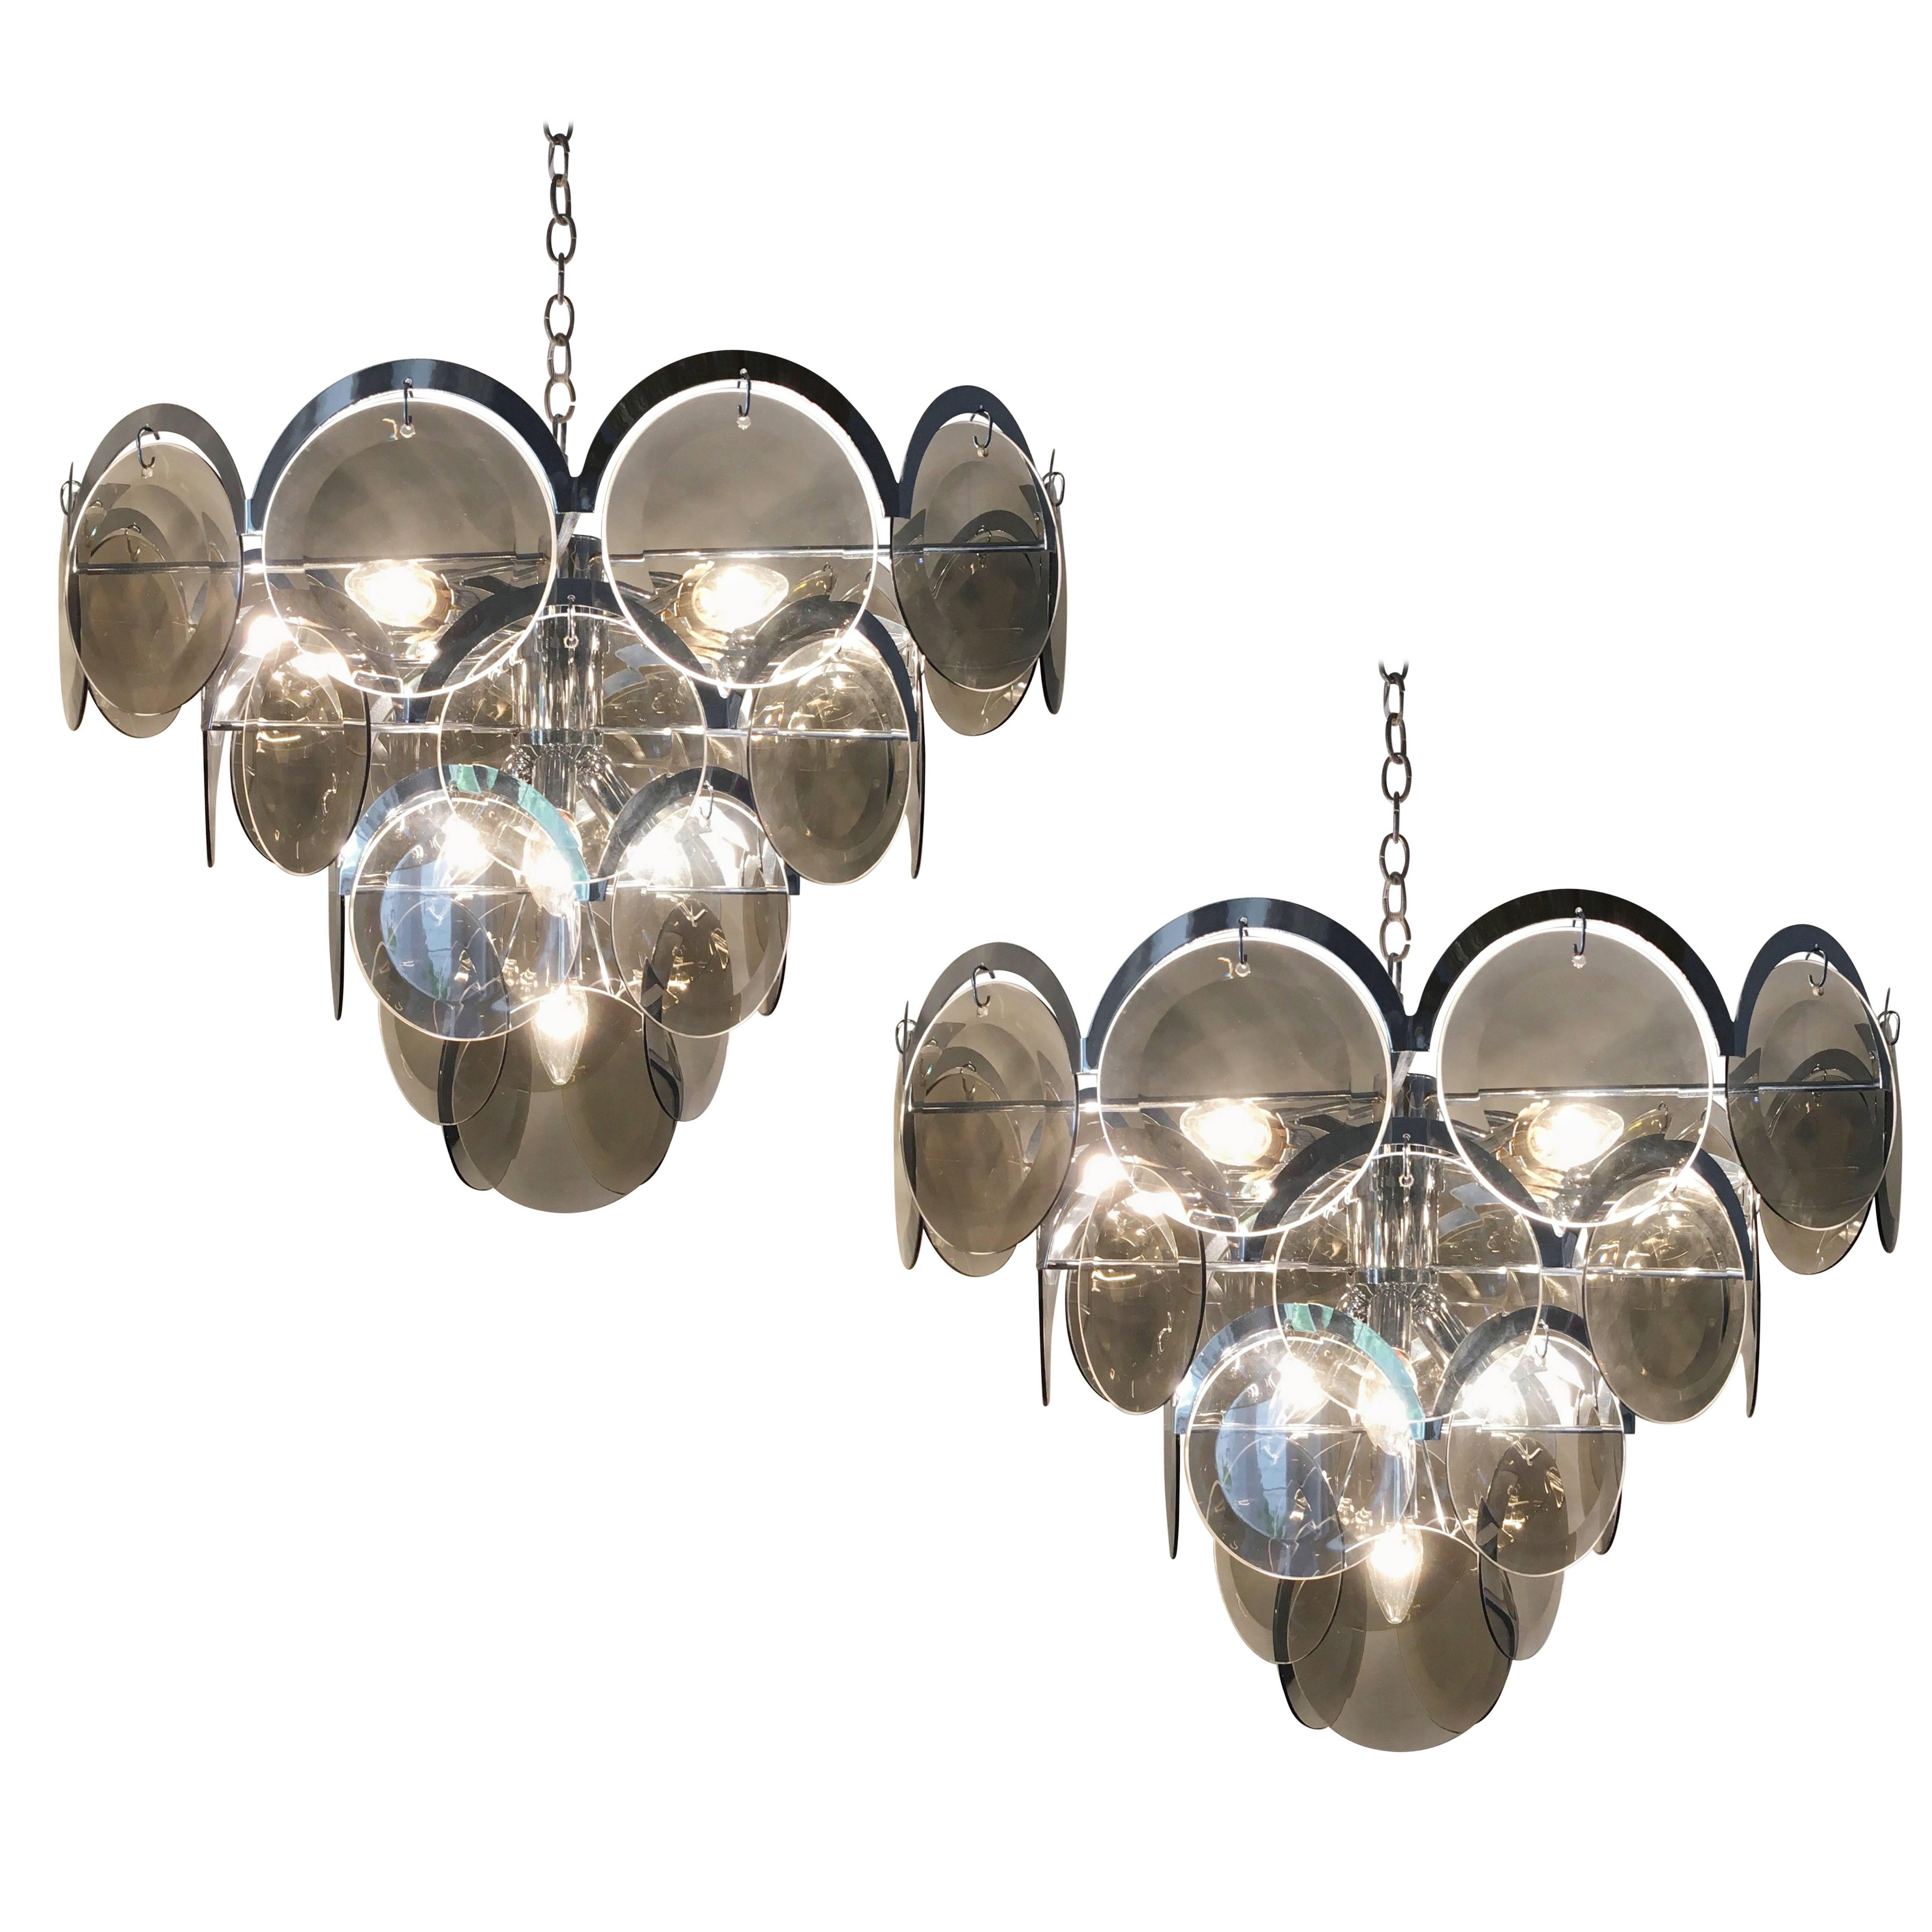 LAST ONE

These gorgeous chandeliers by Vistosi are in excellent condition and look incredibly glamorous whether lit or unlit. 

These offer substantial scale and create real visual impact with their 63cm diameter and 48cm frame height. When the